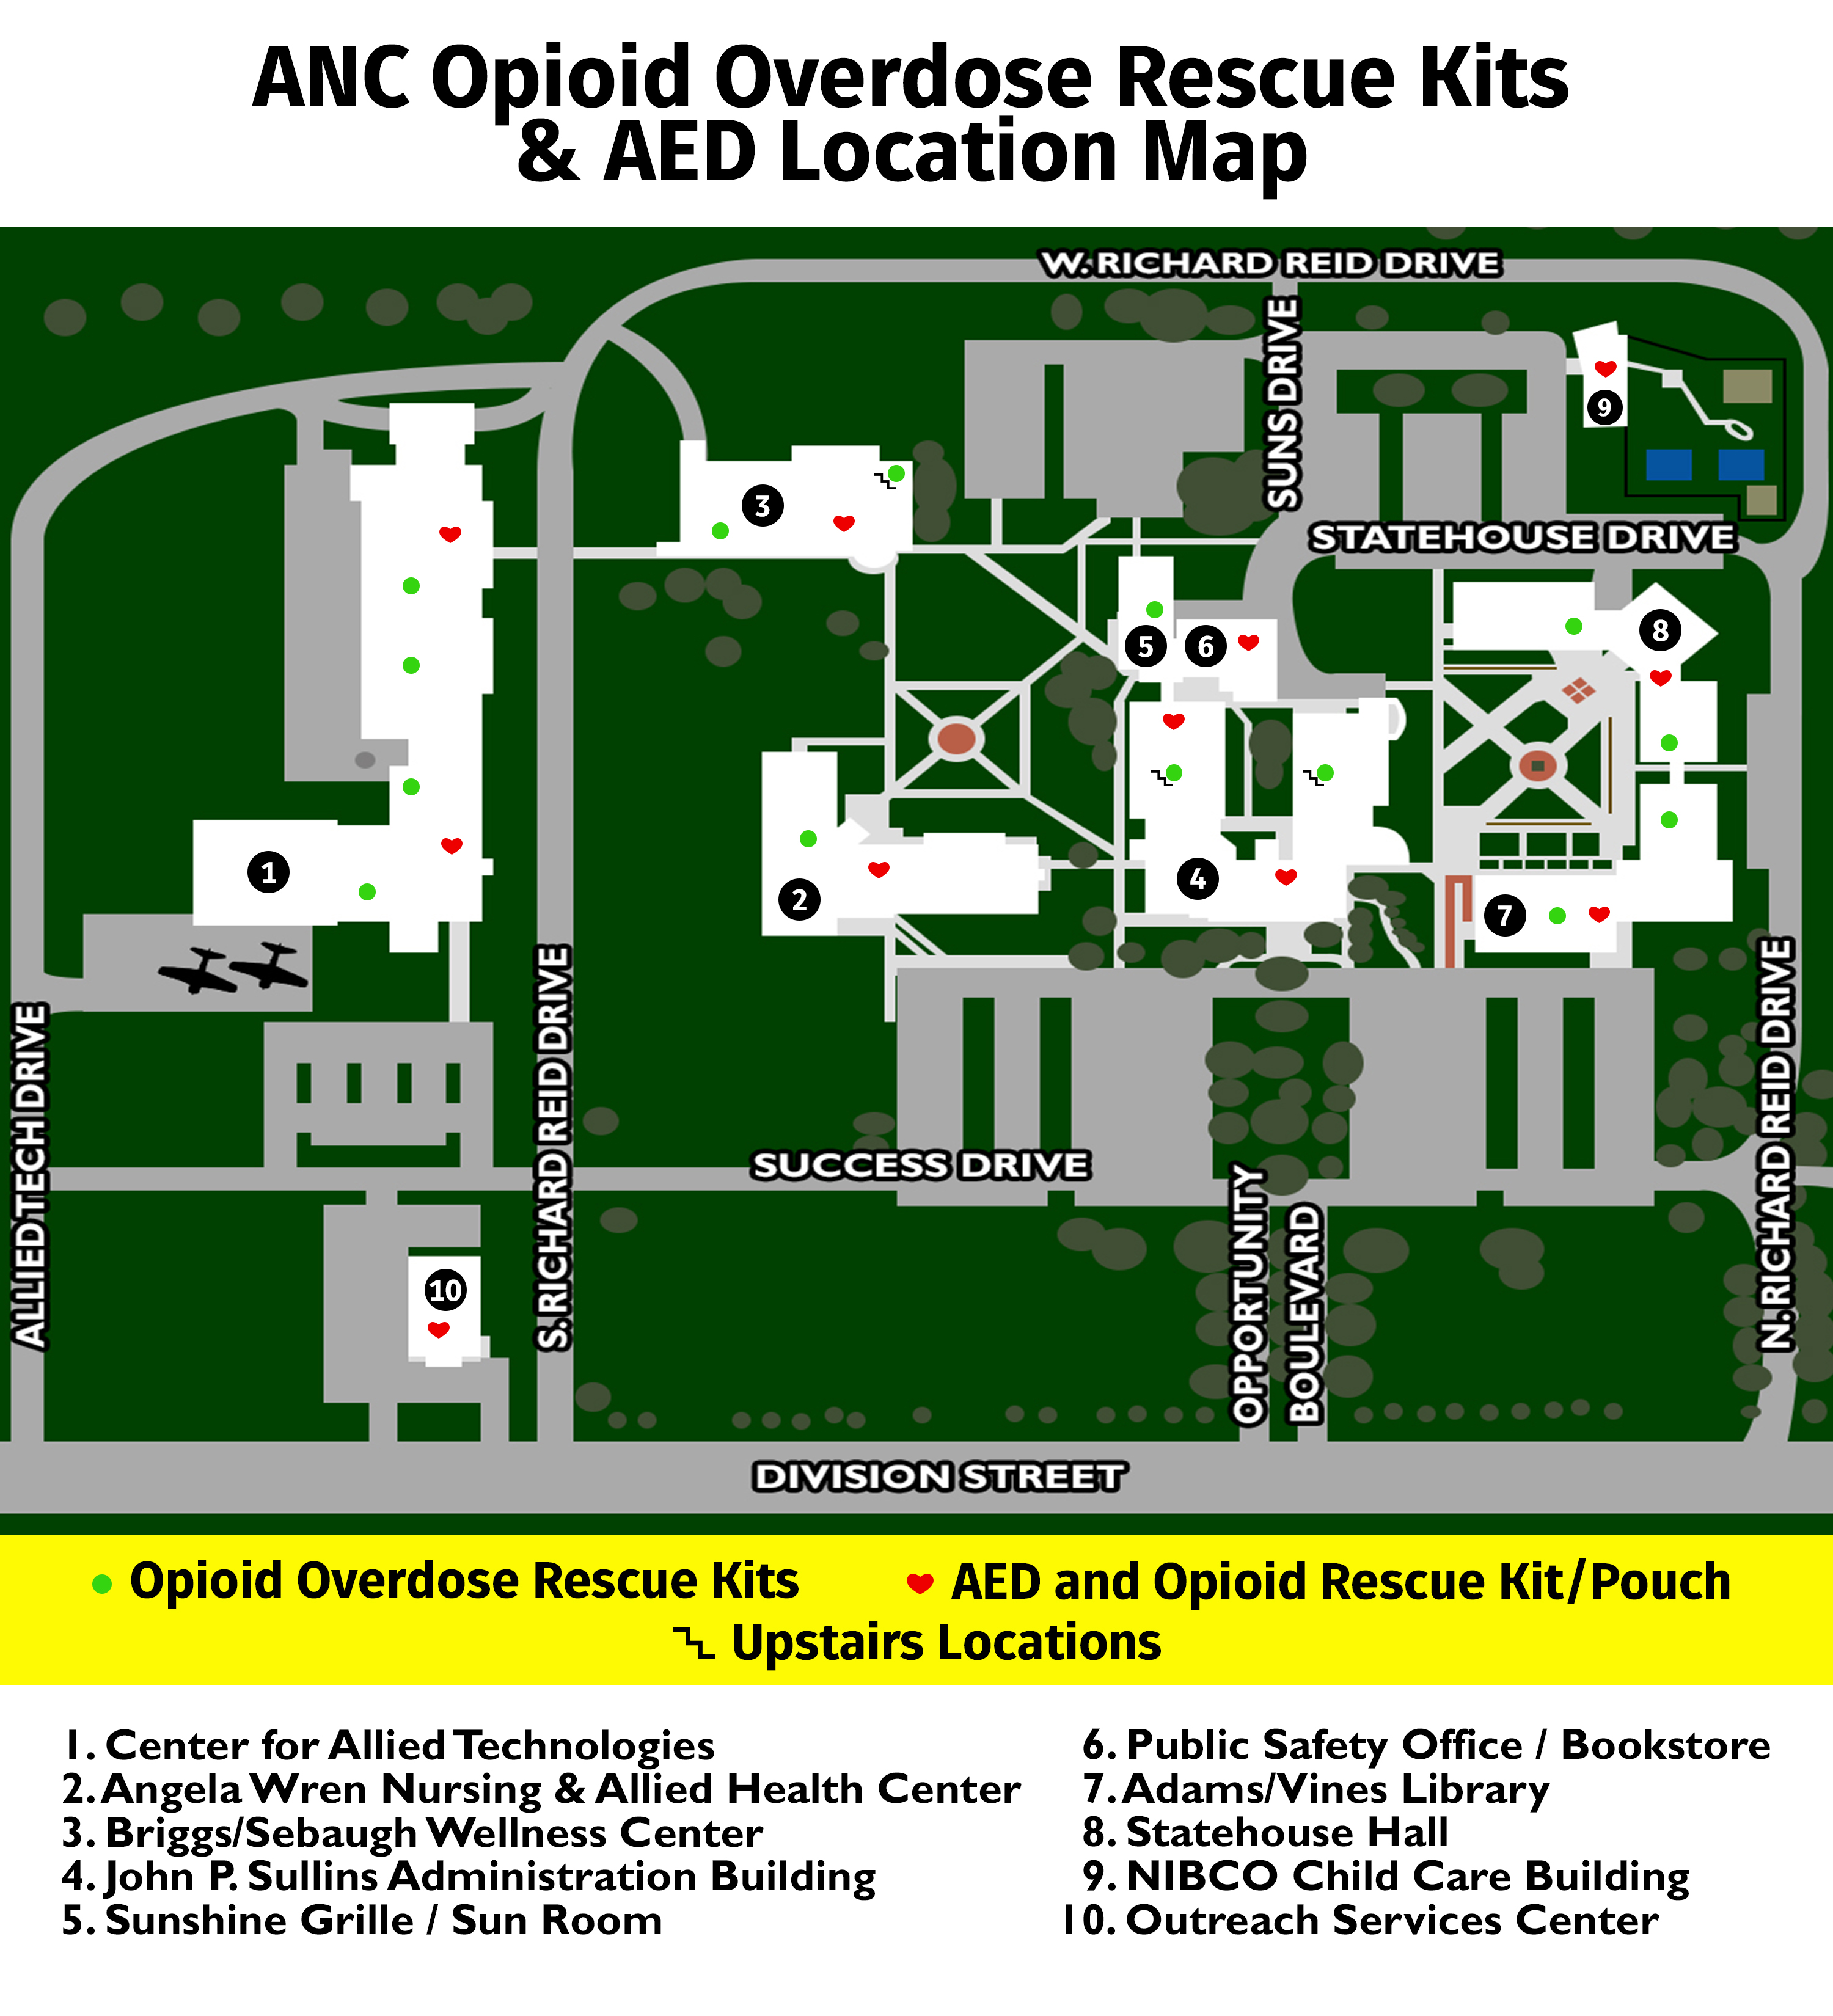 Campus Locations of Opioid Overdose Kits and Automated External Defibrillators (AEDs)